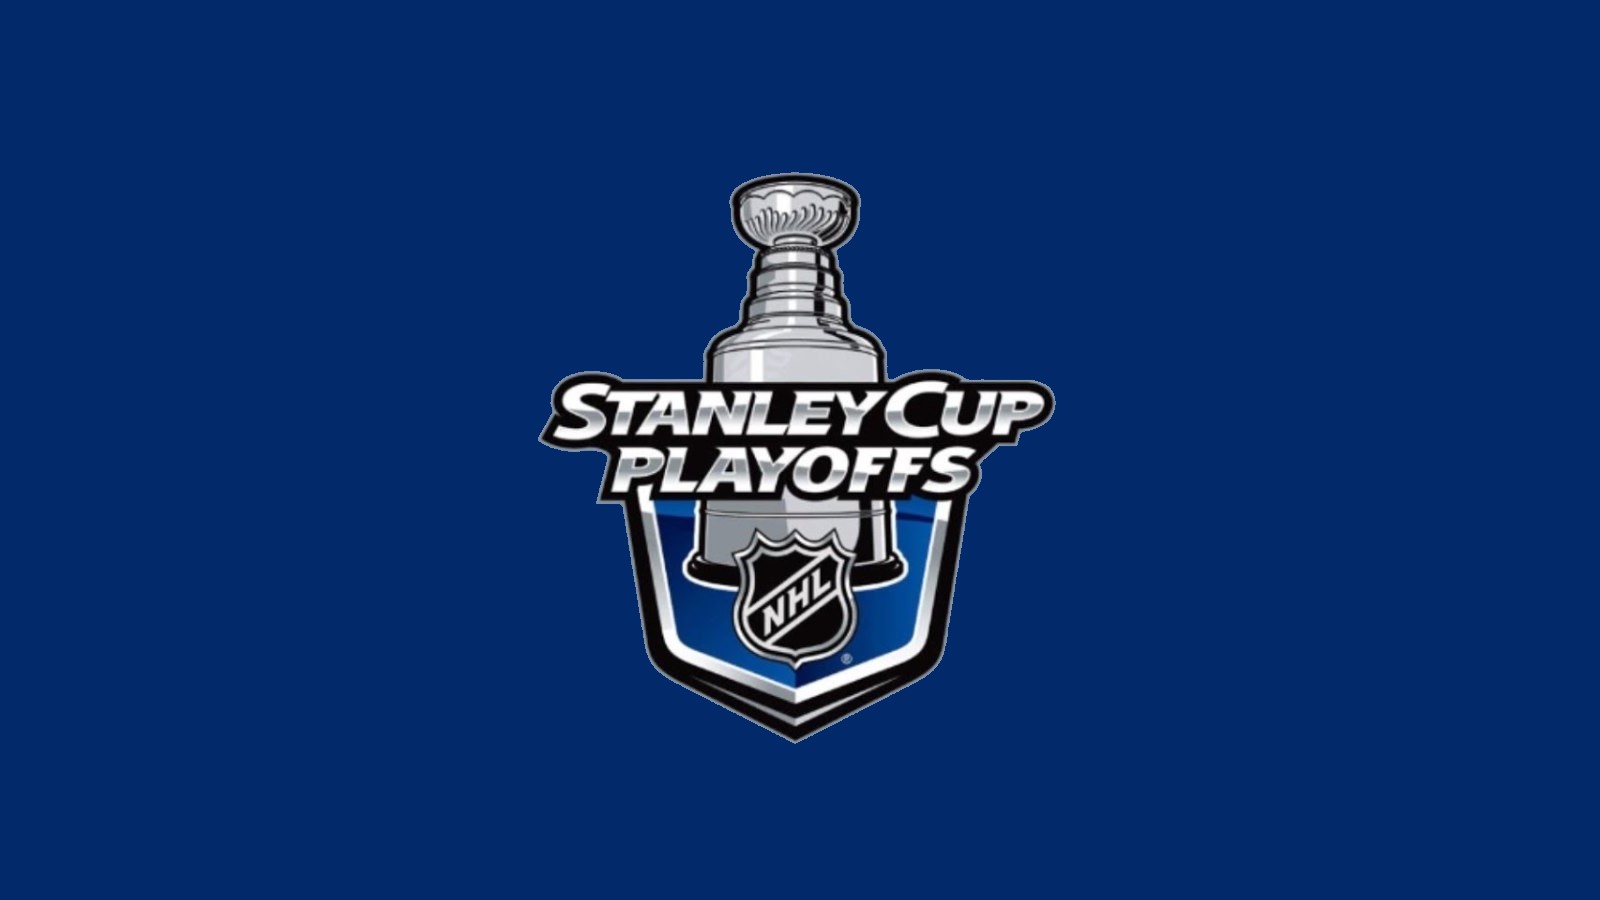 How to Watch NHL Stanley Cup Playoffs 2019 Online Without Cable